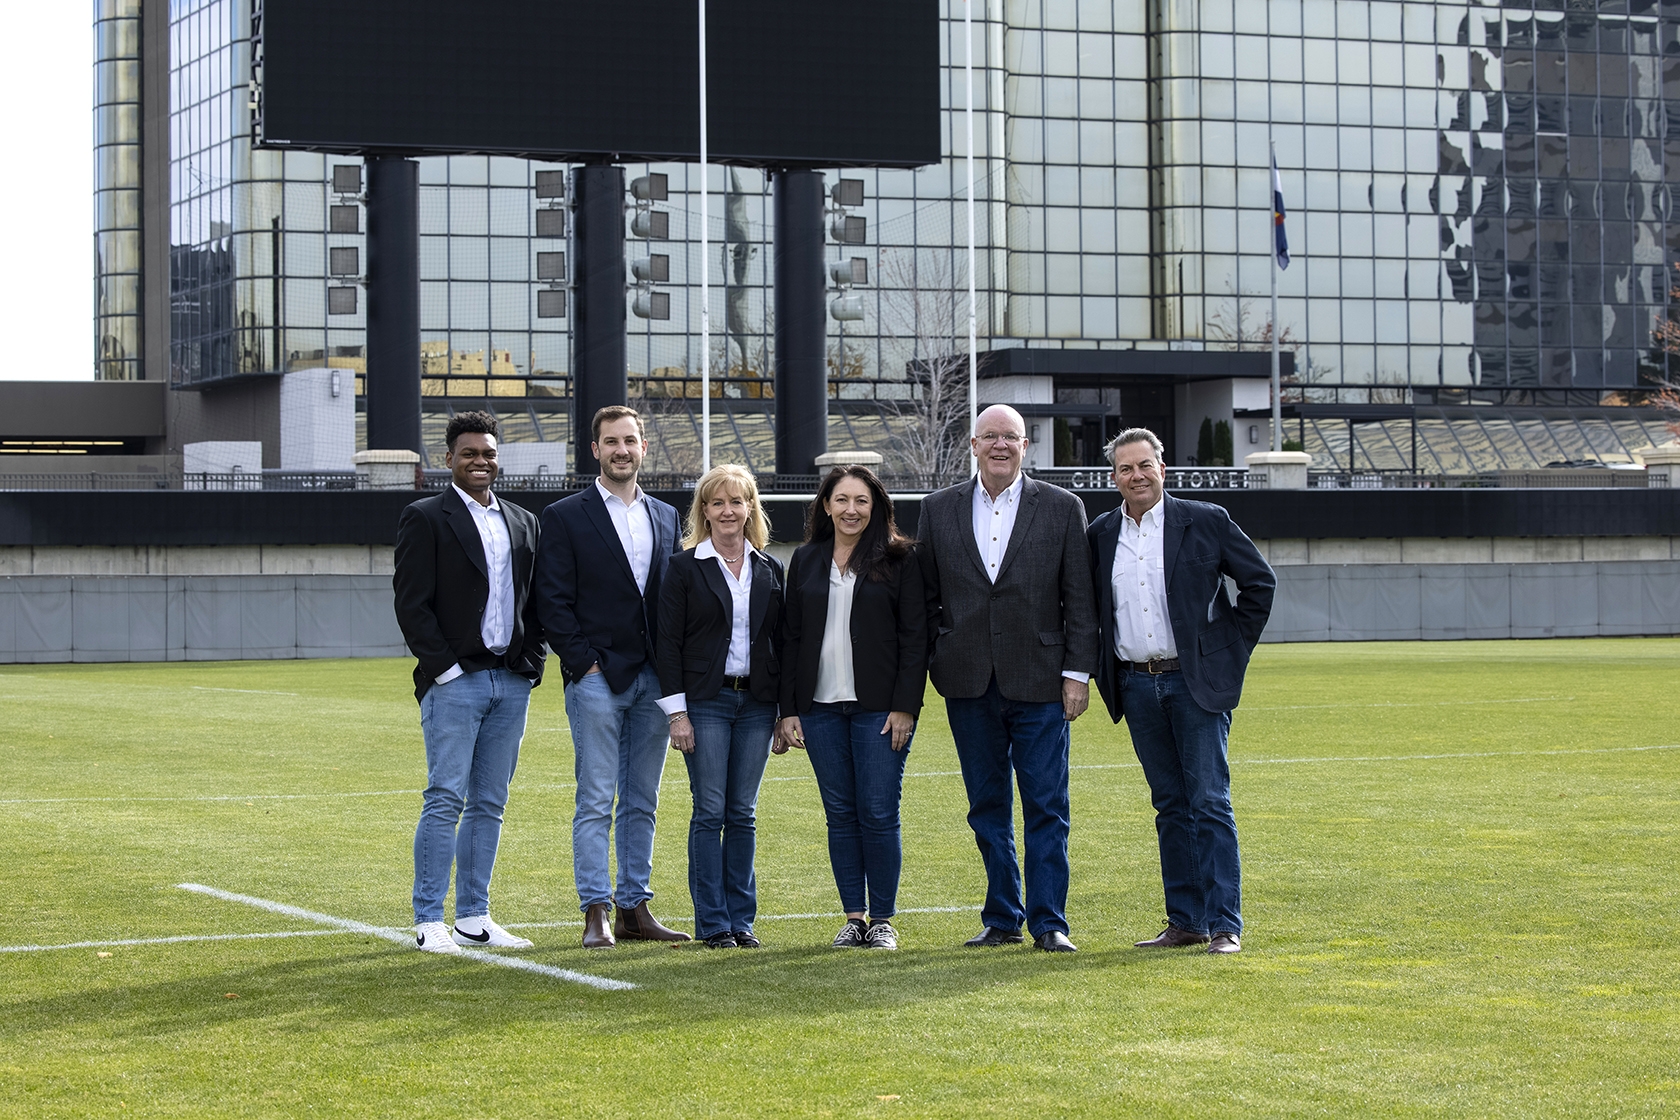 Continuum team members on a sports field